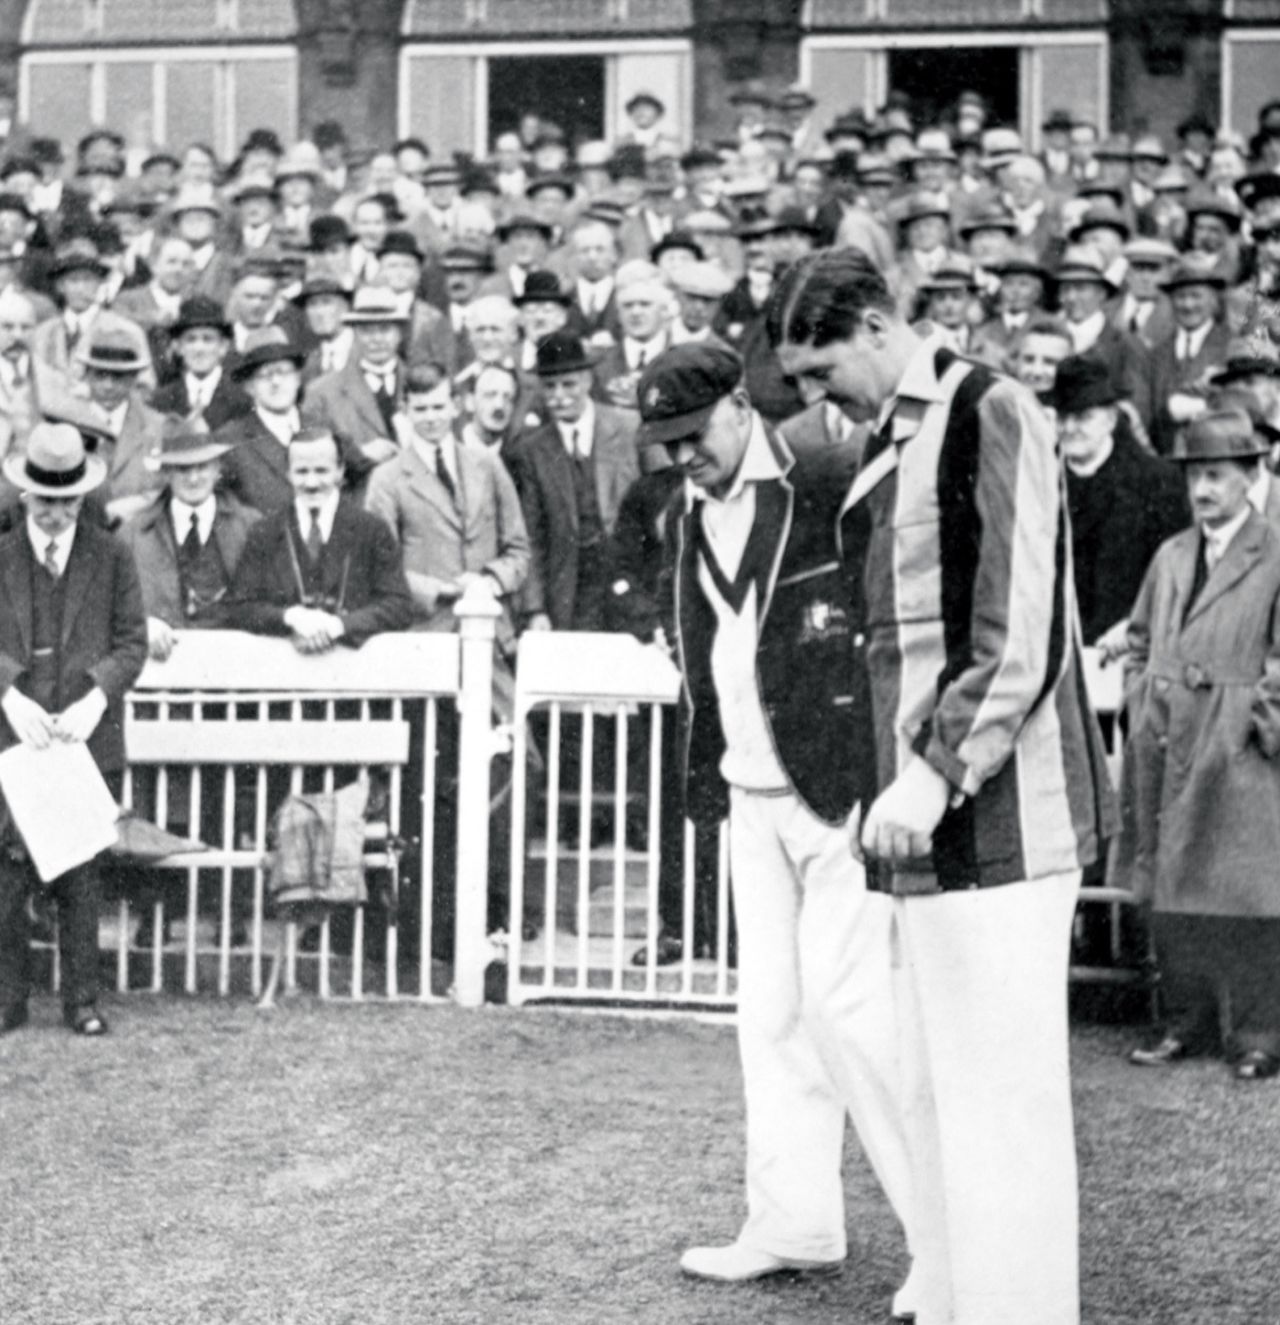 Bill Woodfull and Percy Chapman at the toss, England v Australia, 4th Test, Old Trafford, 1st day, July 25, 1930